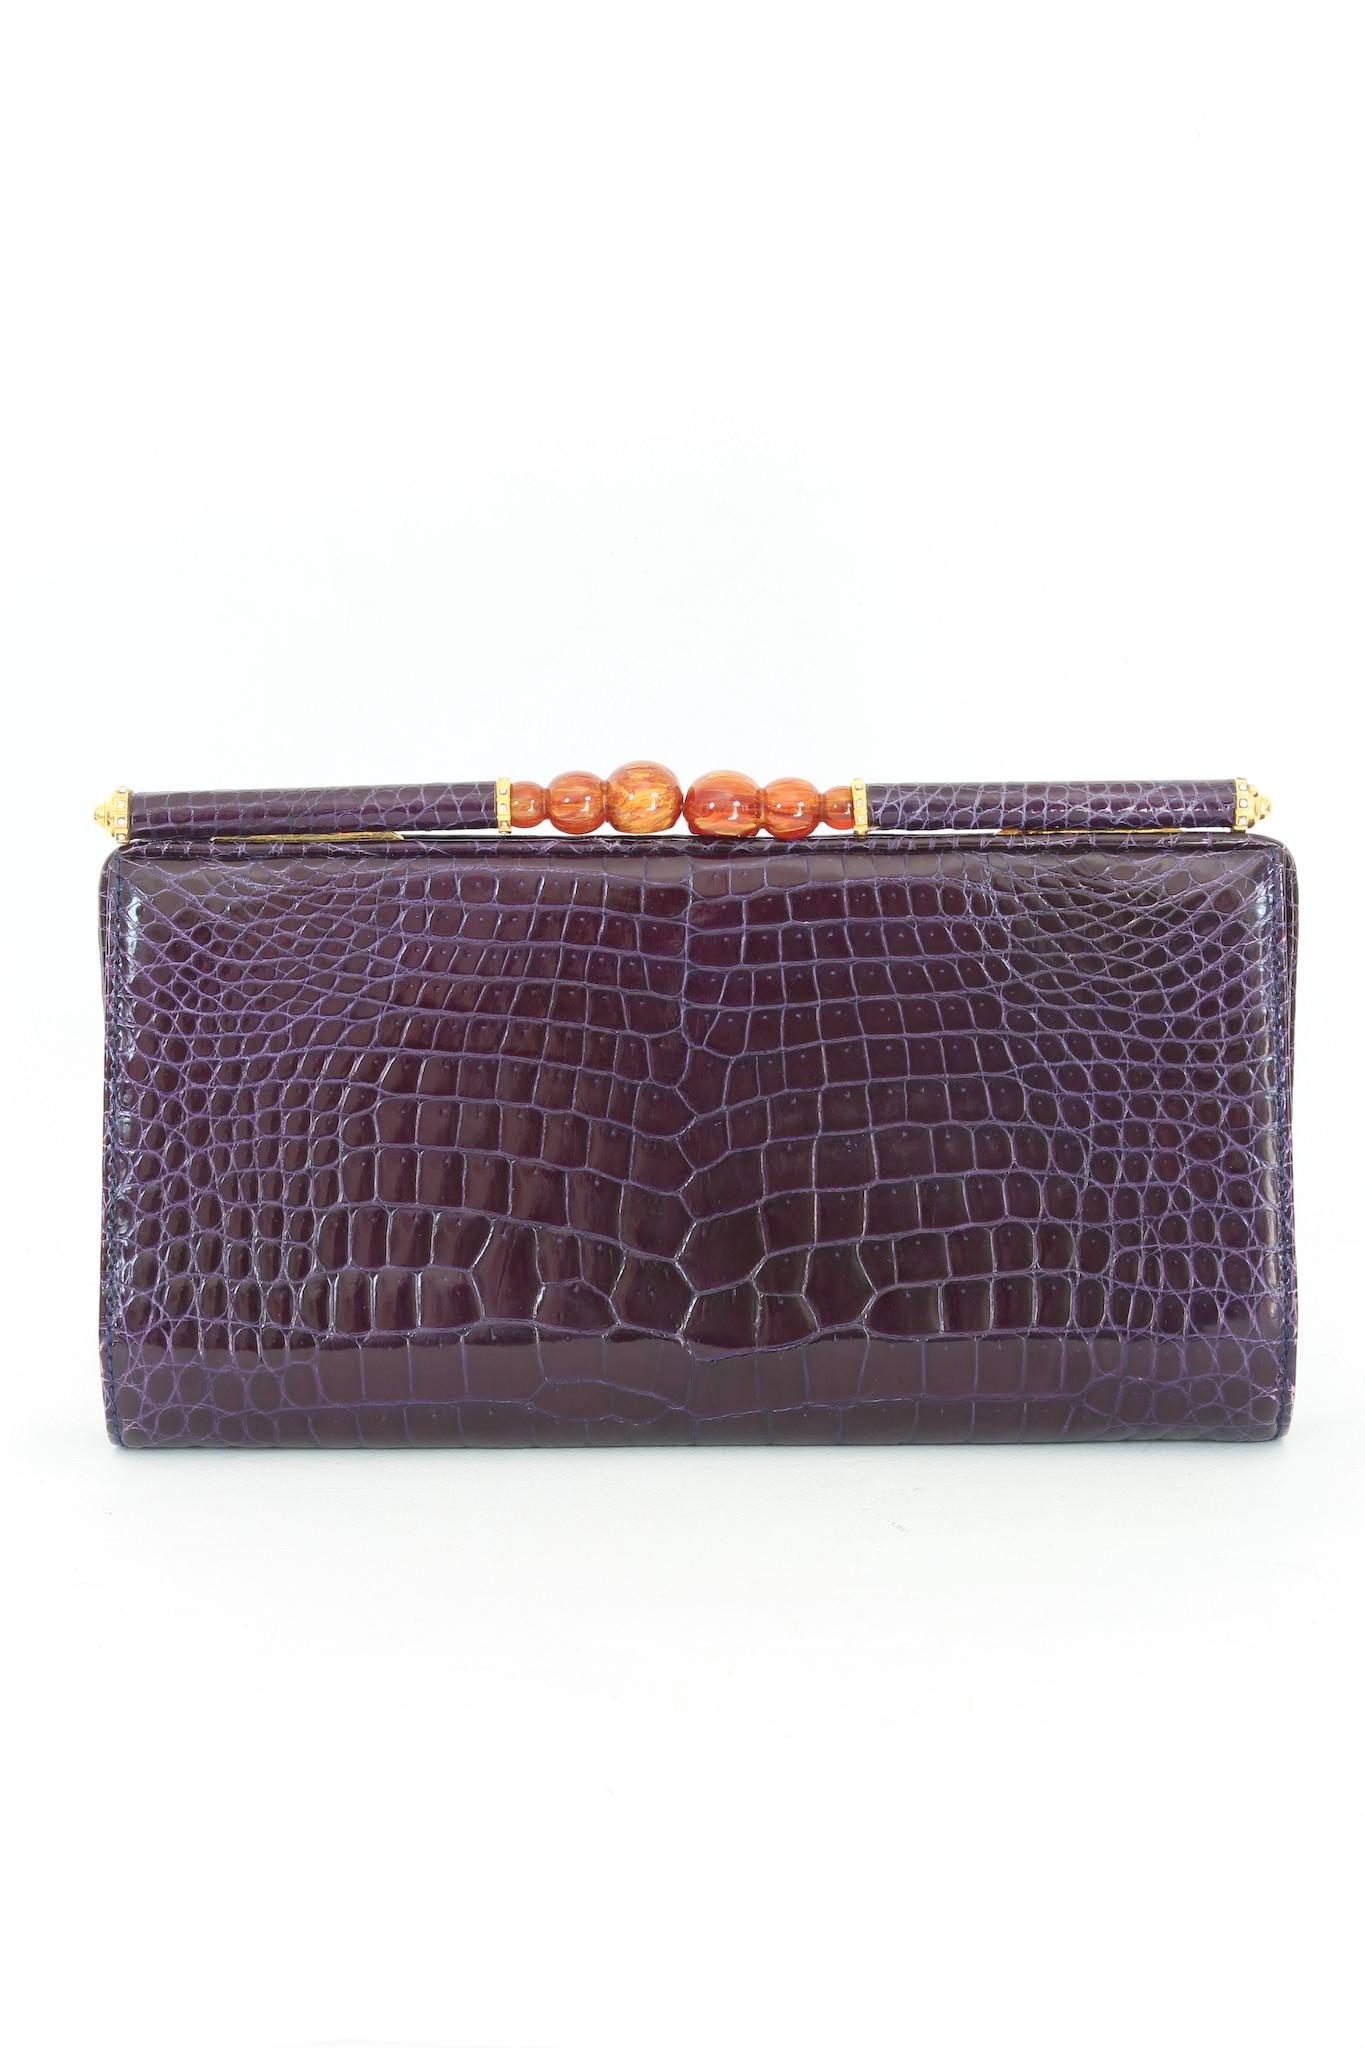 This elegant Gucci clutch bag is a rare vintage piece from the 1970s. Made from genuine purple crocodile leather, it features jeweled handles with Swarovski for a truly luxurious look. Clip closure, internally lined in purple leather with two small